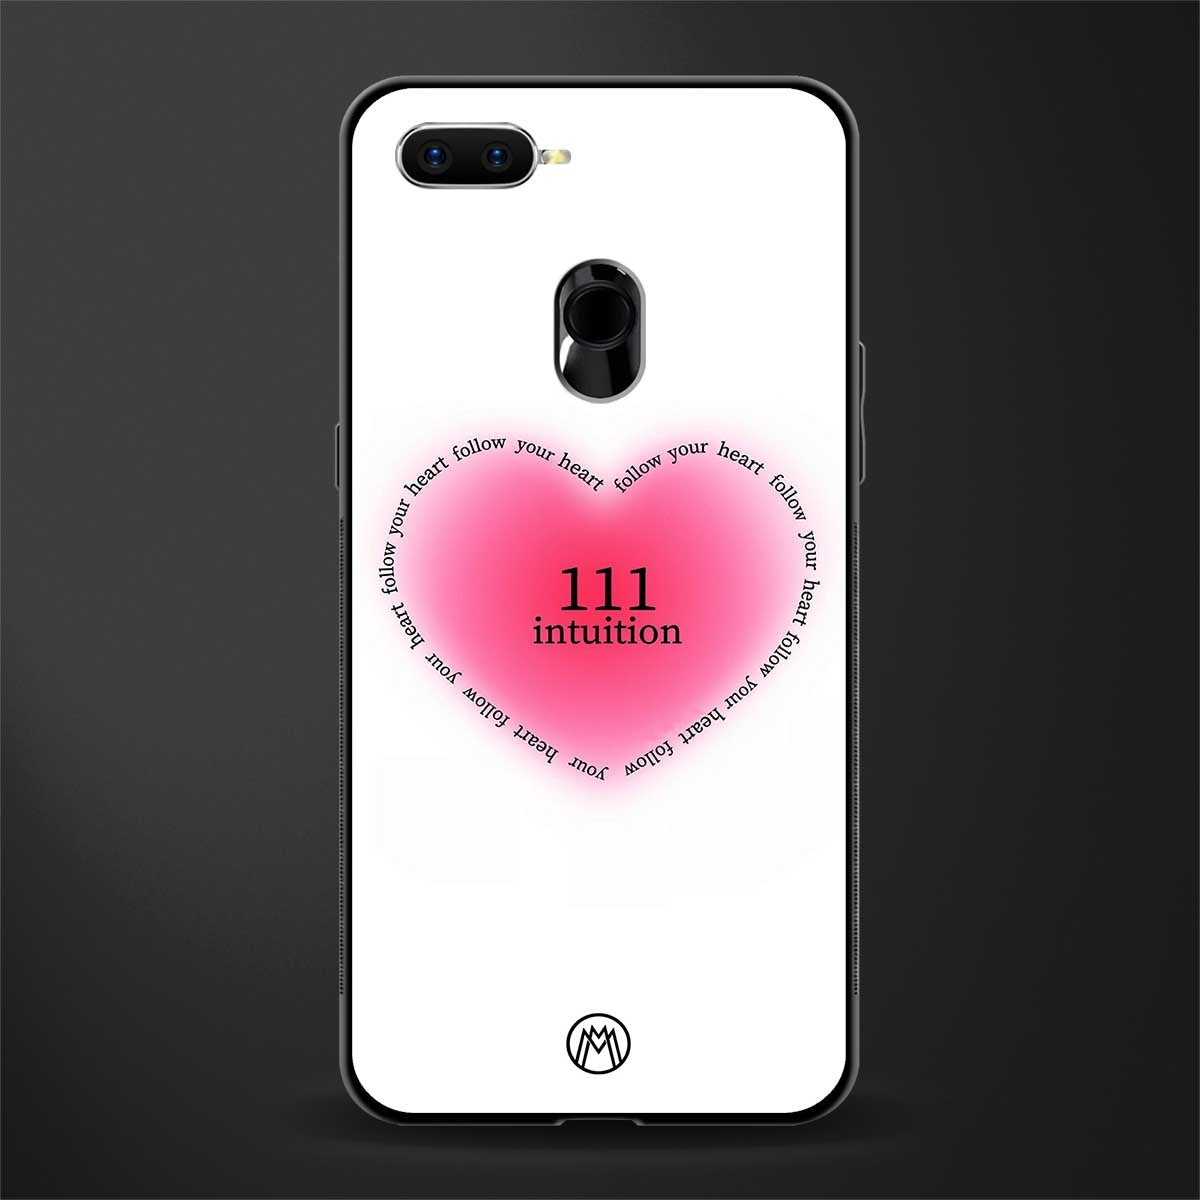 111 intuition glass case for oppo a7 image